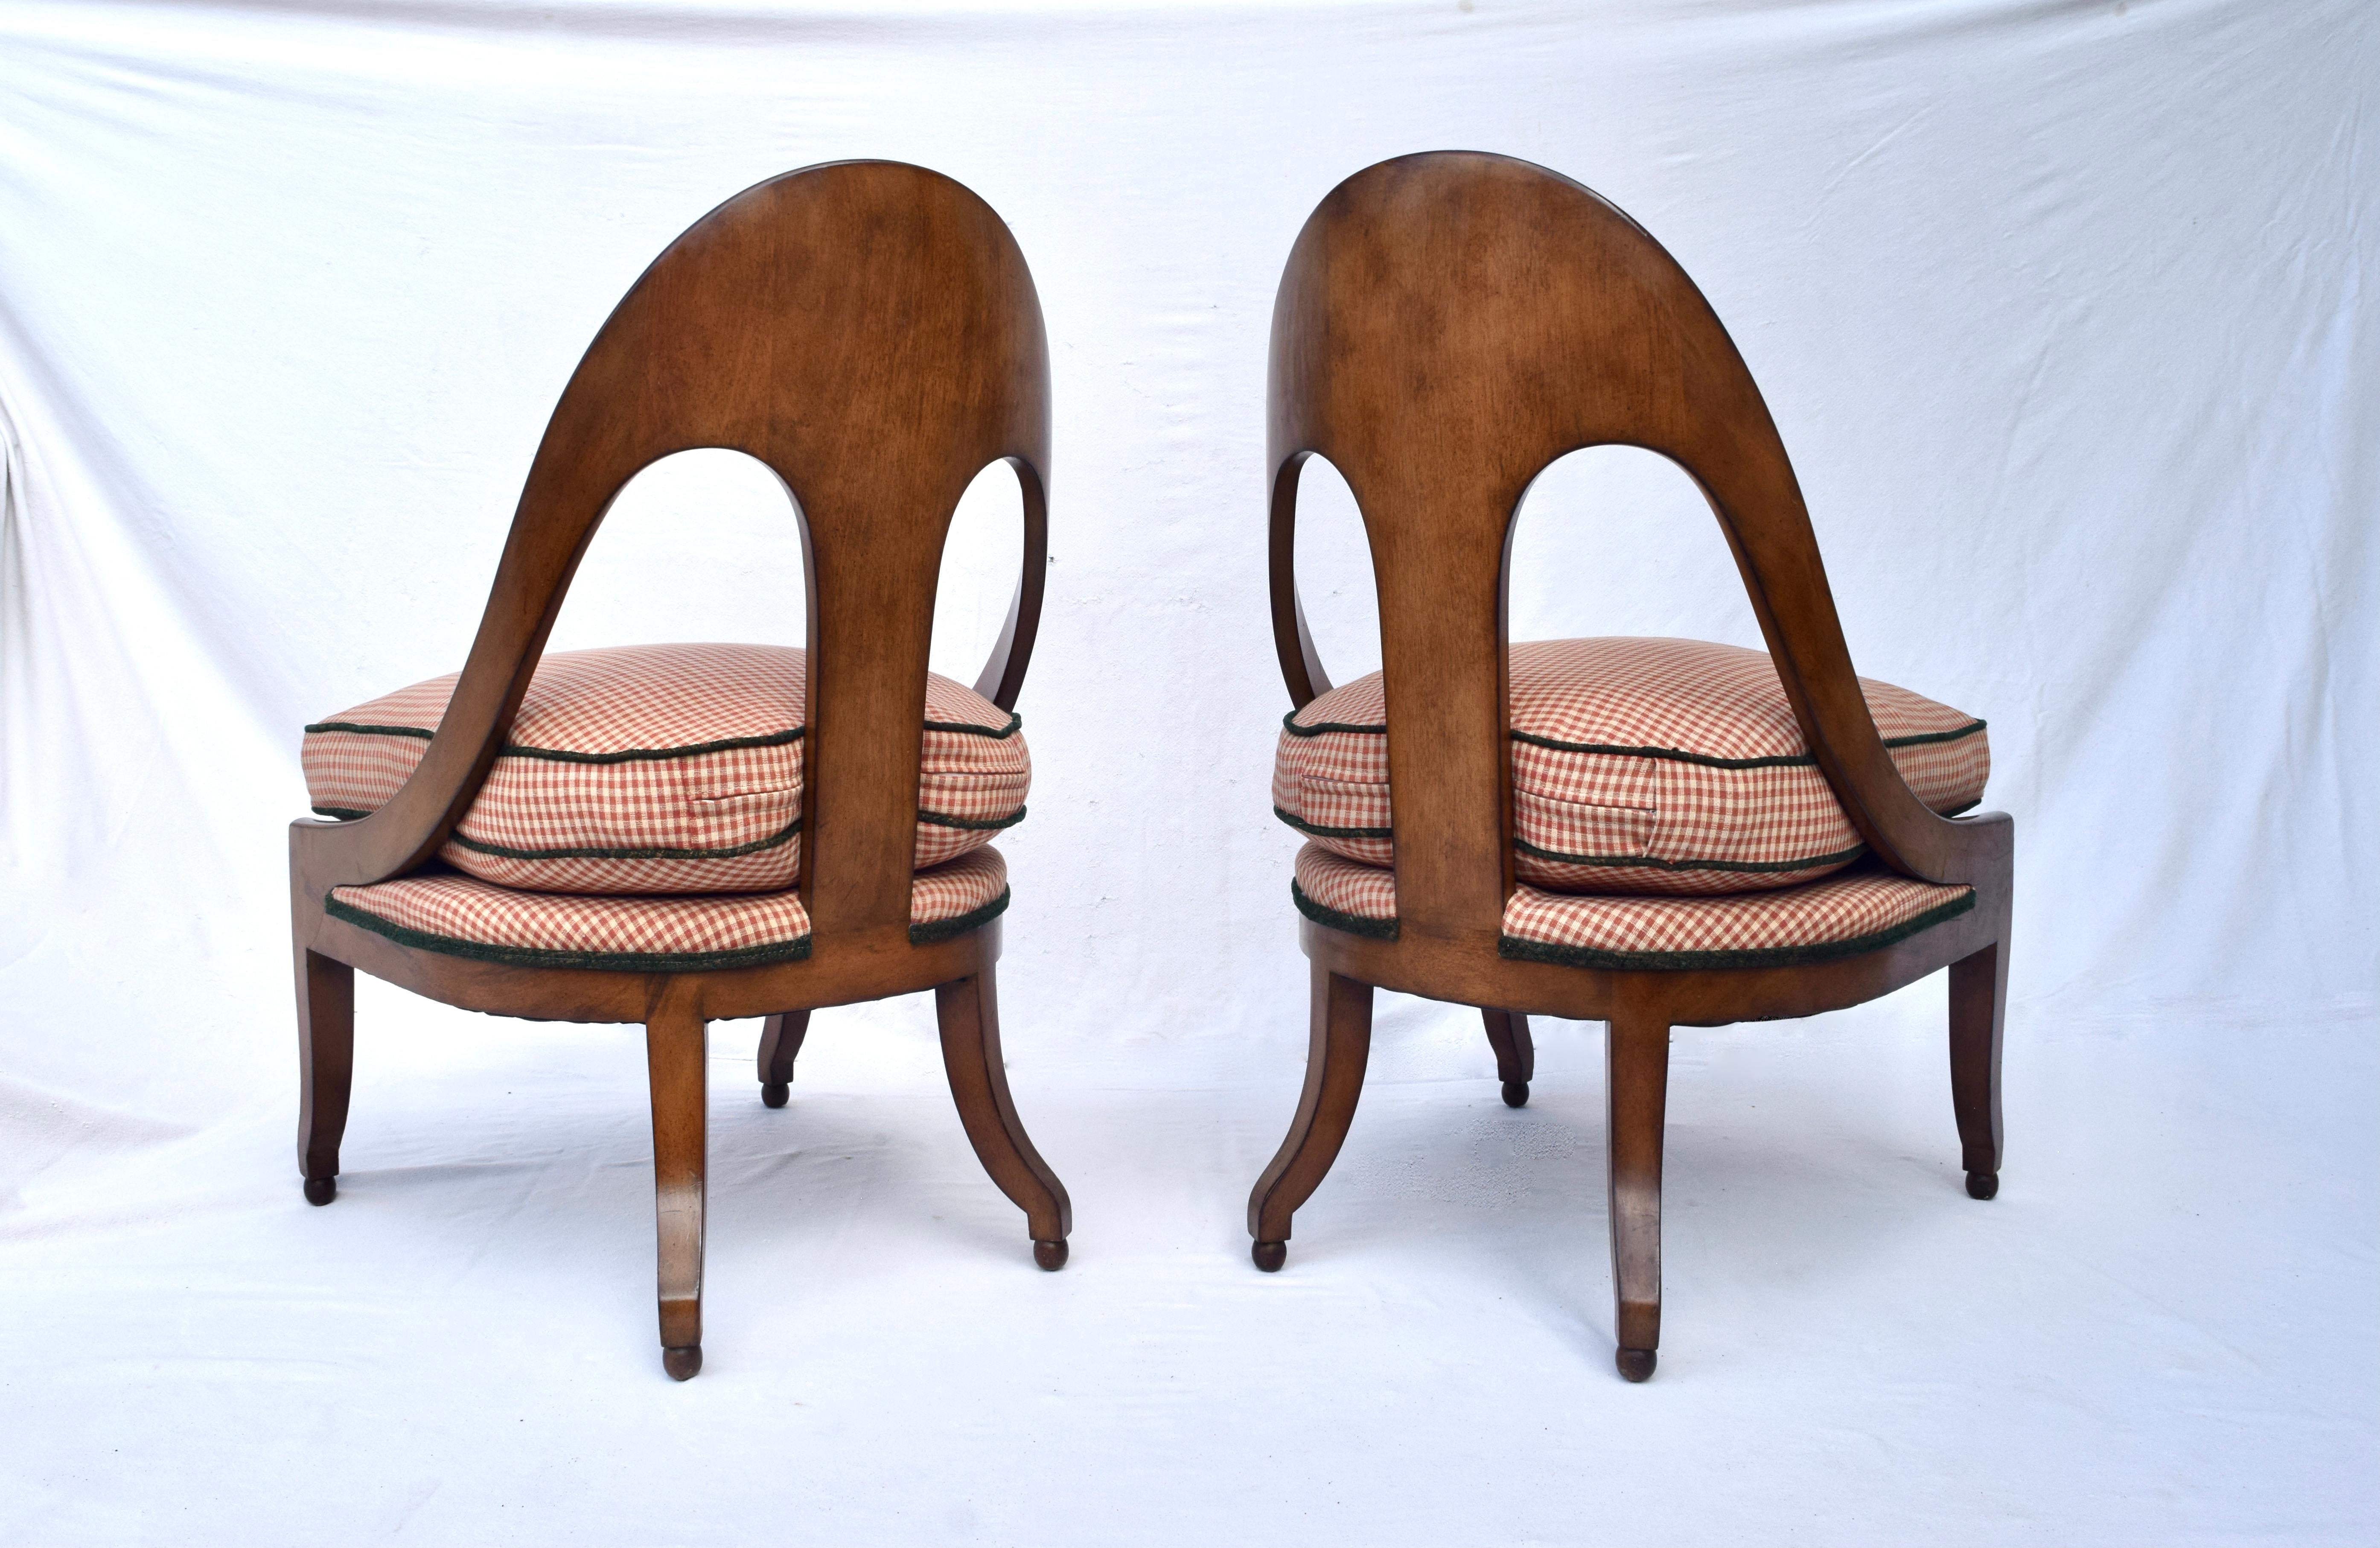 20th Century Michael Taylor for Baker Spoon Chairs